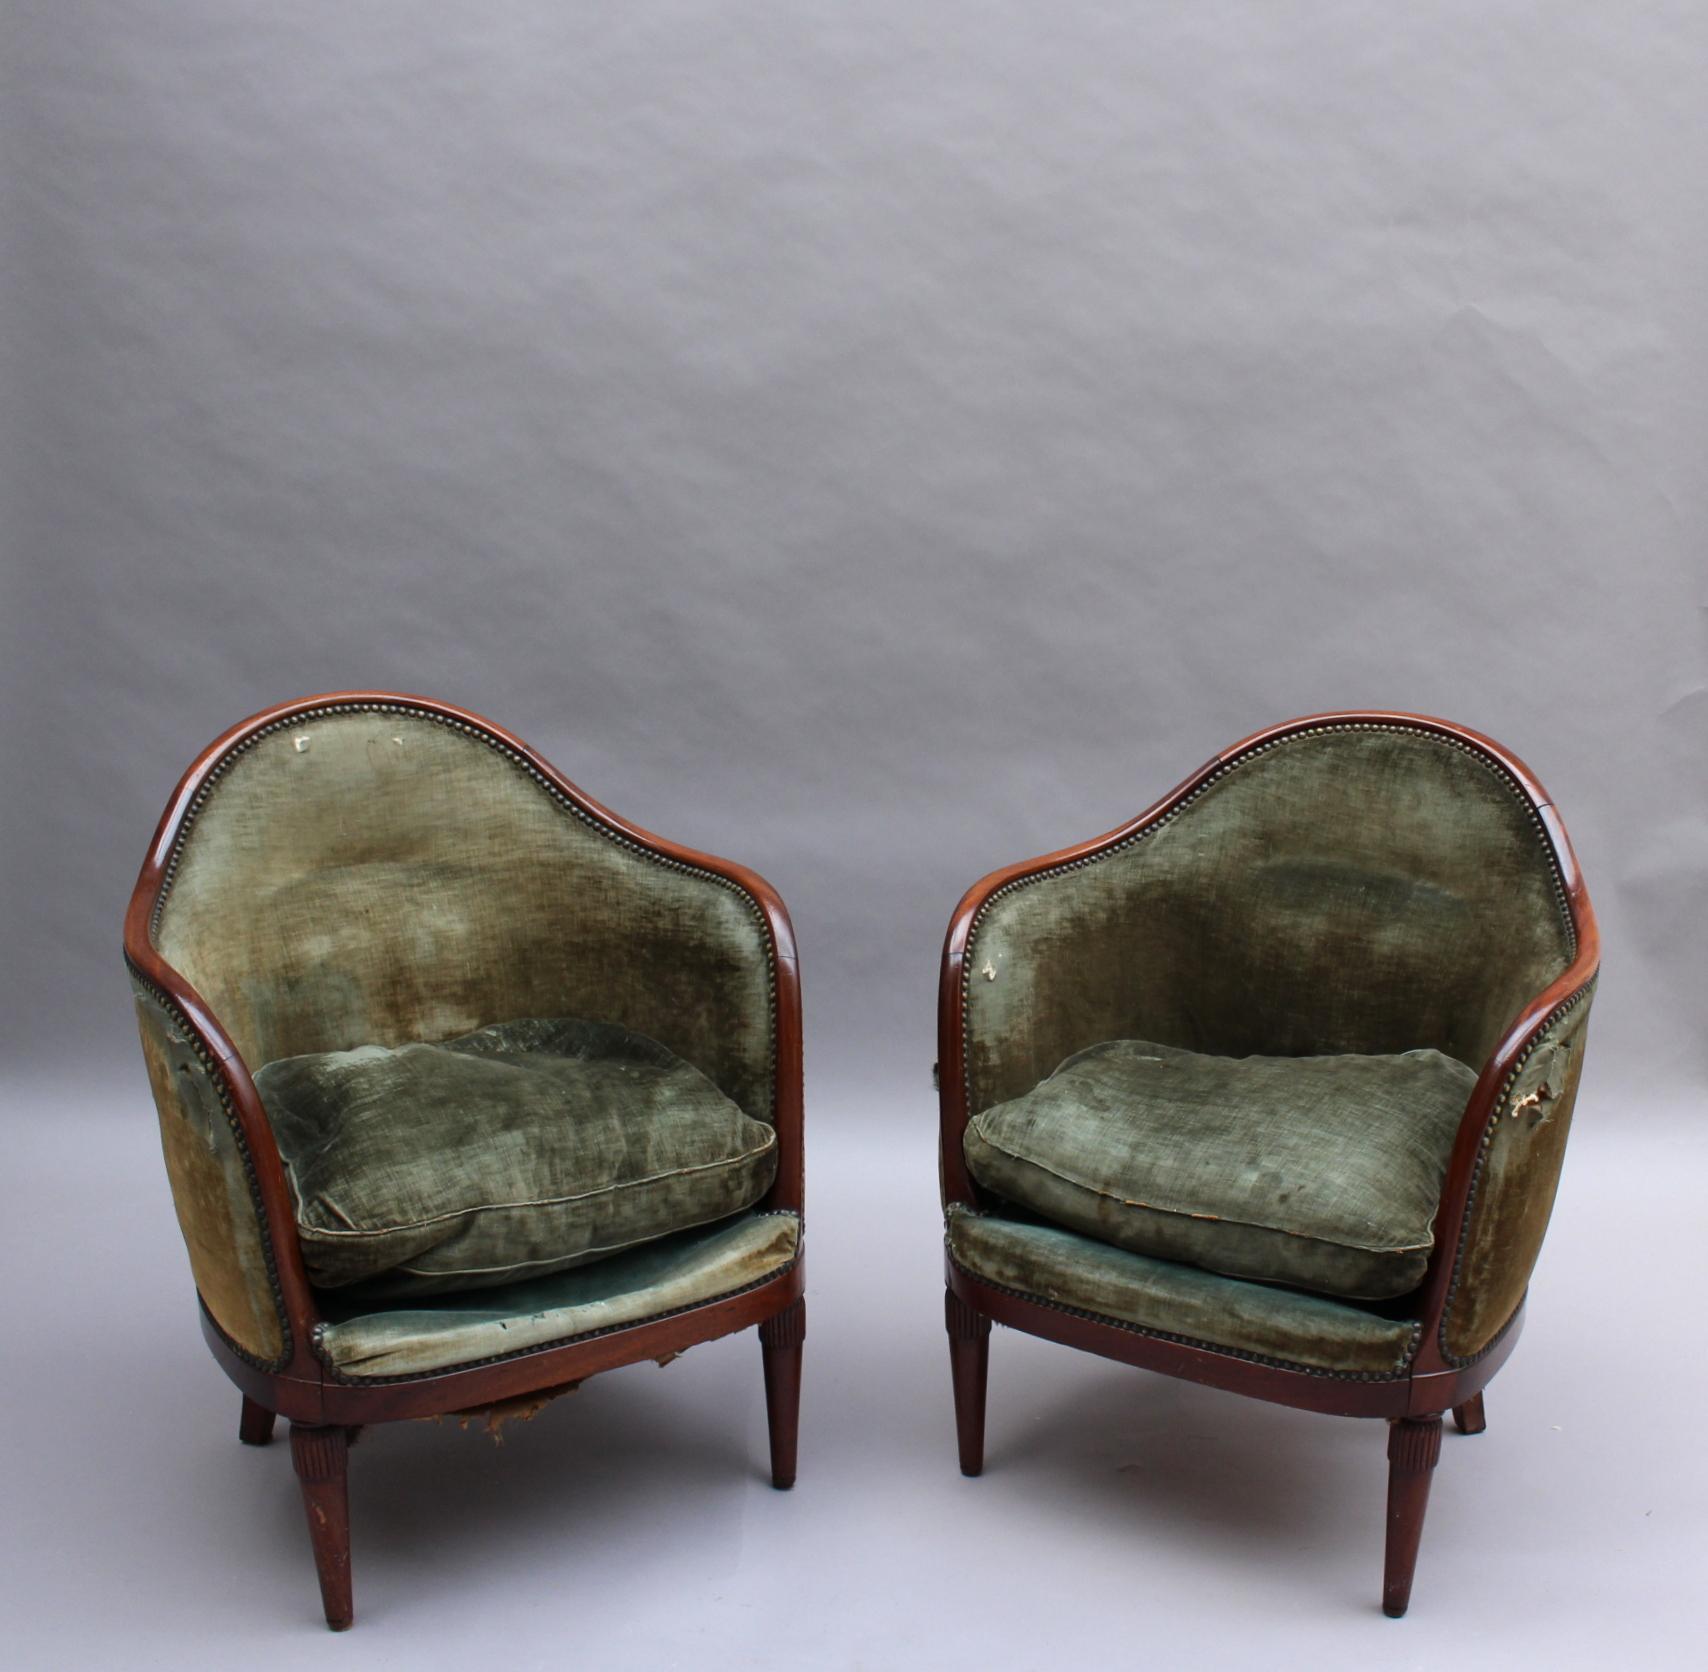 Two fine French Art Deco mahogany gondola armchairs.
The first picture show 4 armchairs but 2 of them have been sold.